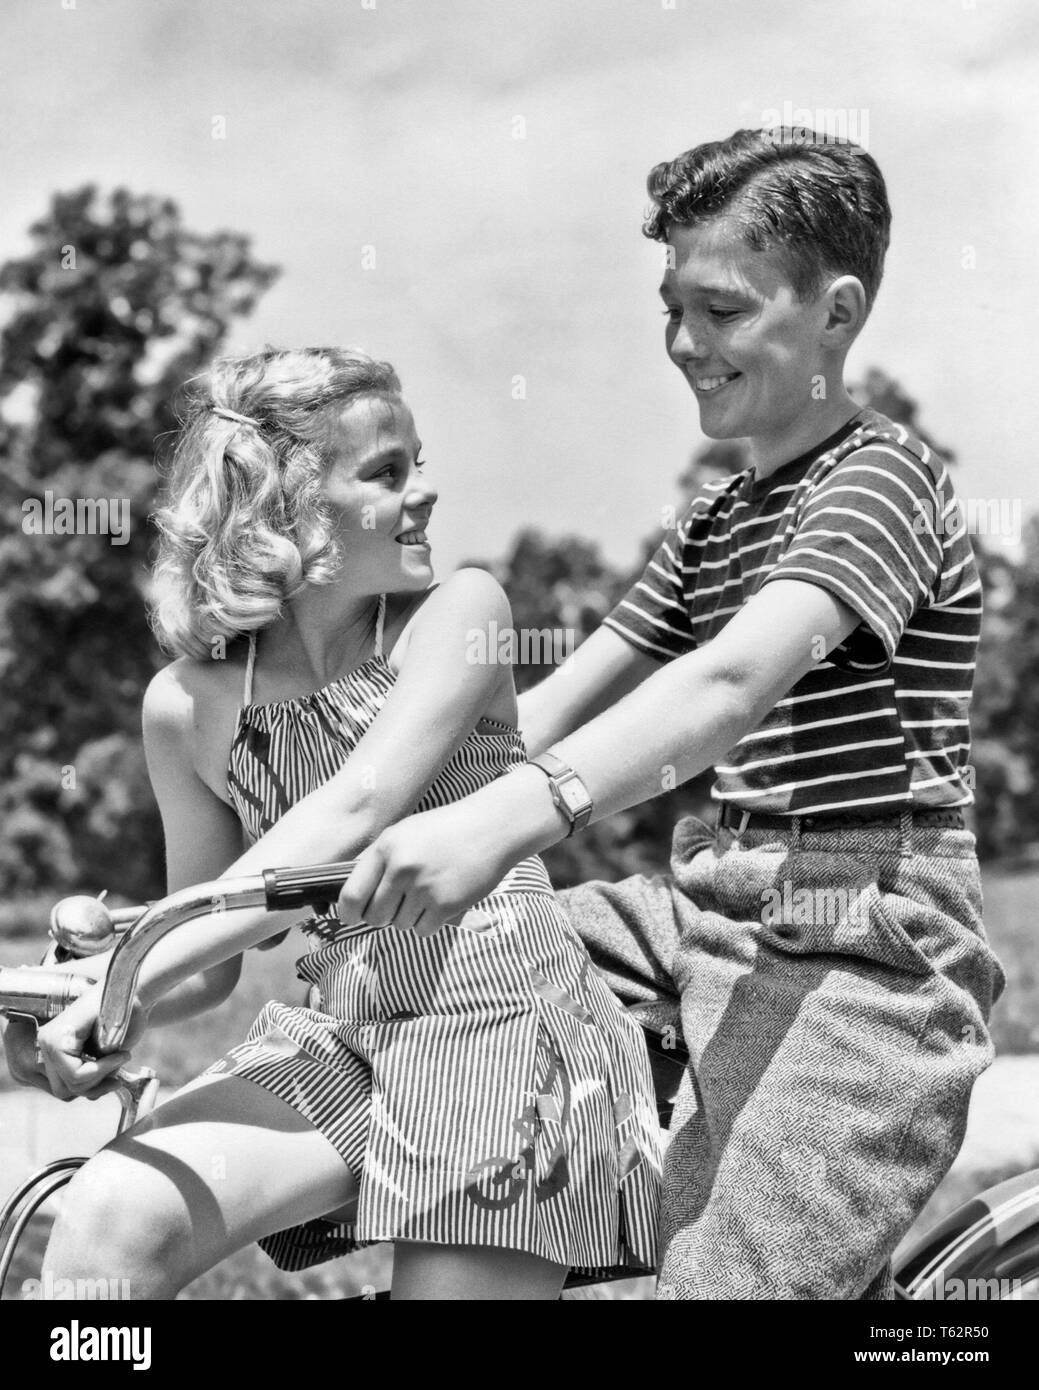 1930s 1940s SMILING TEENAGE BOY AND GIRL RIDING BICYCLE TOGETHER  - b1053 HAR001 HARS BALANCE PLEASED JOY LIFESTYLE FEMALES RURAL HEALTHINESS FRIENDSHIP HALF-LENGTH ADOLESCENT PERSONS CARING MALES TEENAGE GIRL TEENAGE BOY CONFIDENCE B&W HAPPINESS CHEERFUL RECREATION OPPORTUNITY SMILES CONNECTION JOYFUL STYLISH TEENAGED AFFECTION GROWTH JUVENILES MEETS TOGETHERNESS BLACK AND WHITE CAUCASIAN ETHNICITY HAR001 OLD FASHIONED Stock Photo